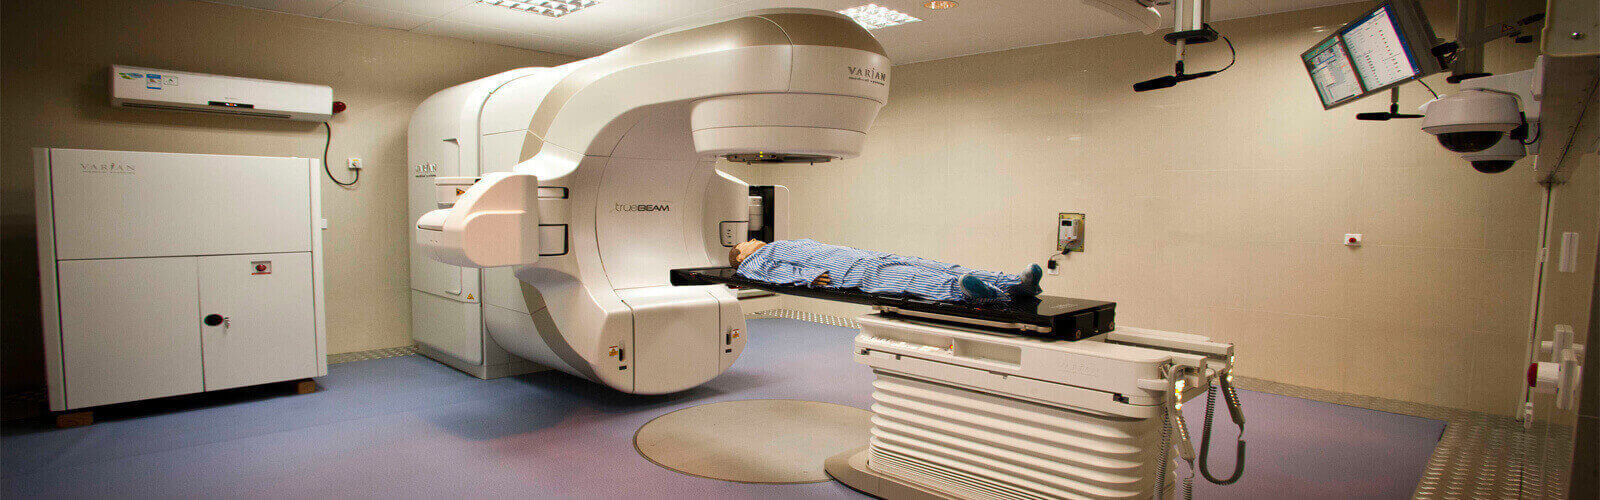 Radiotherapy in Dudley